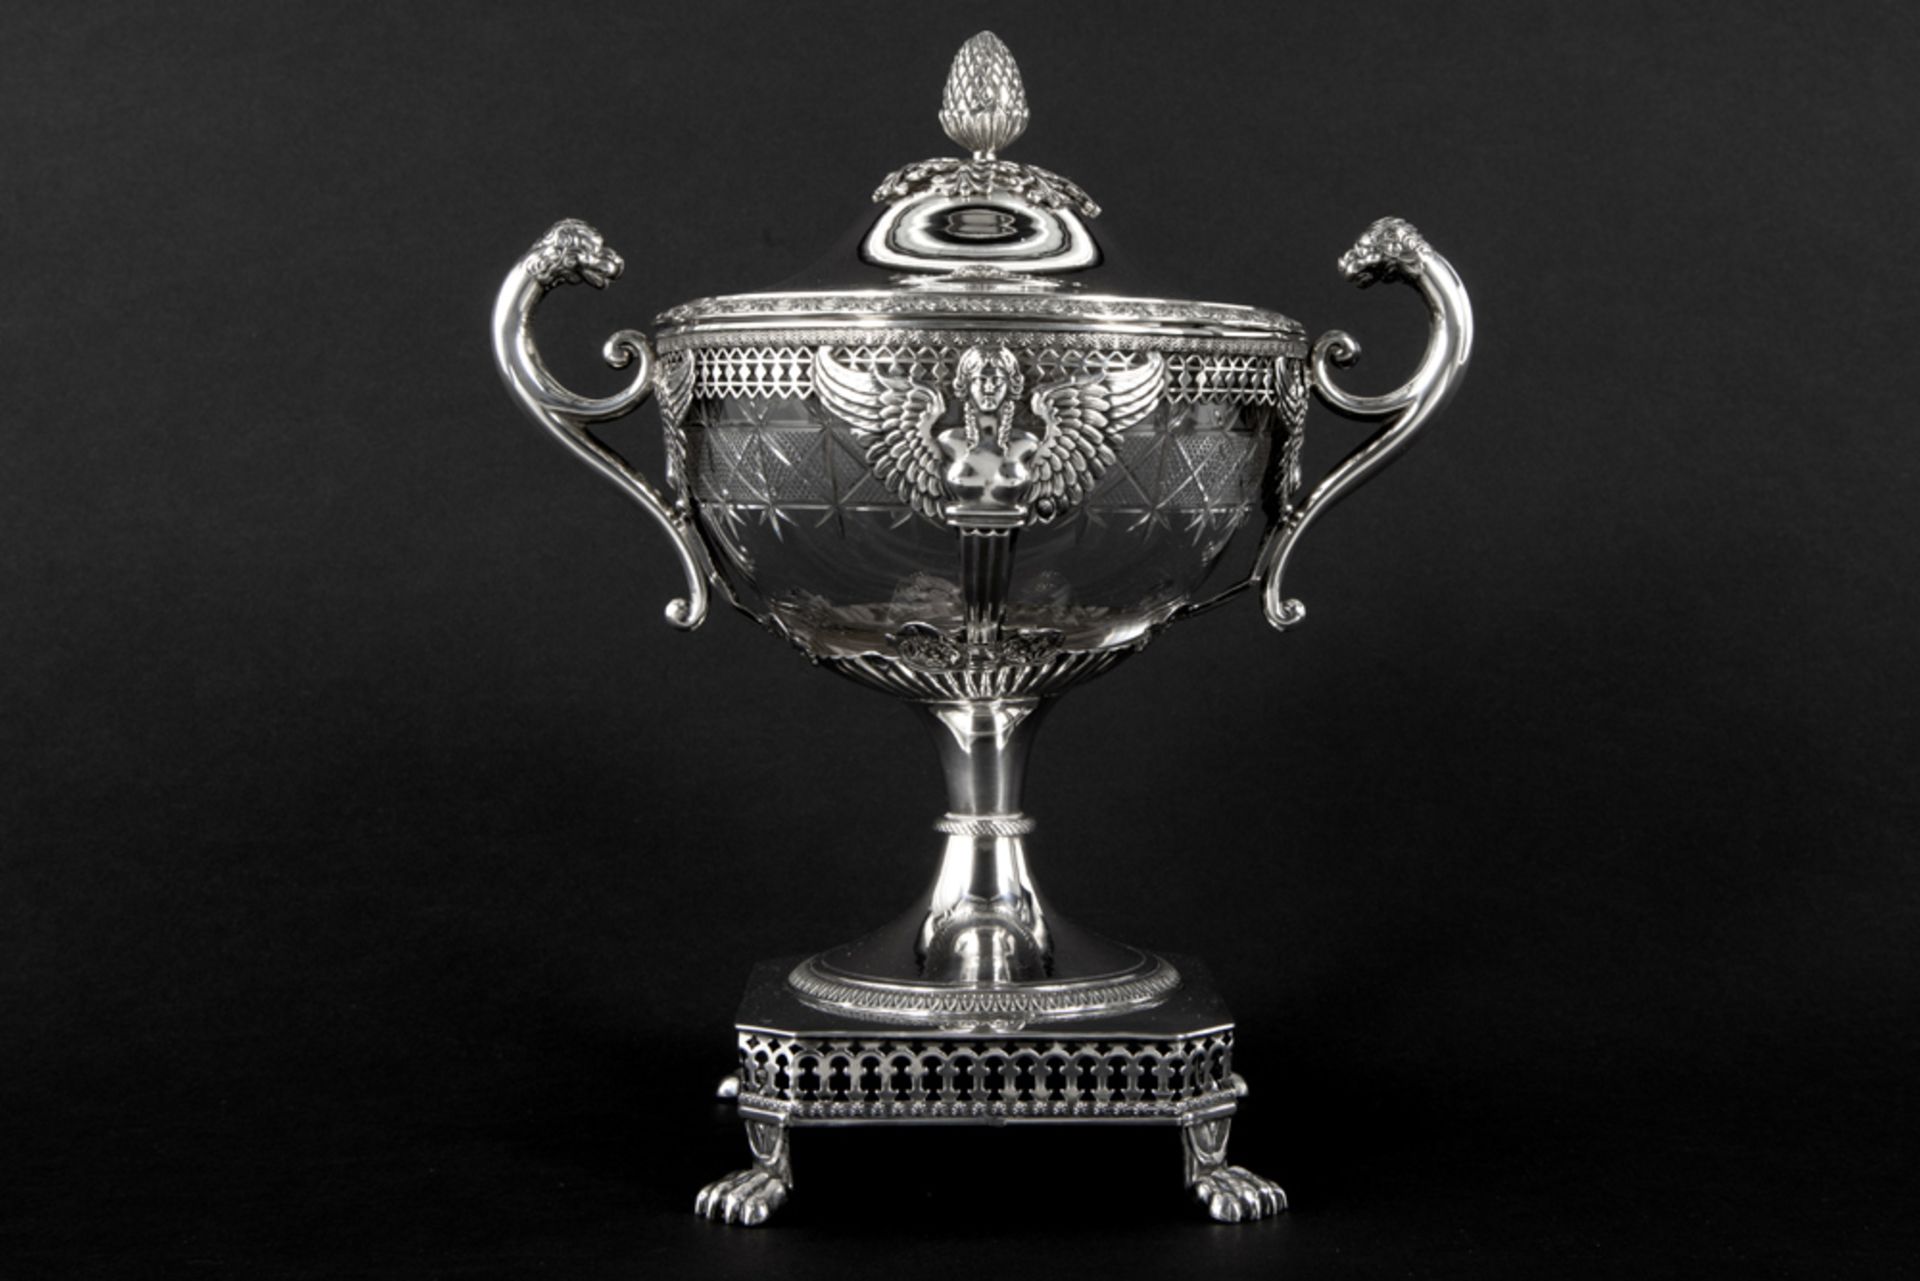 late 18th Cent. French neoclassical jam pot in marked silver and clear glass || Laat achttiende